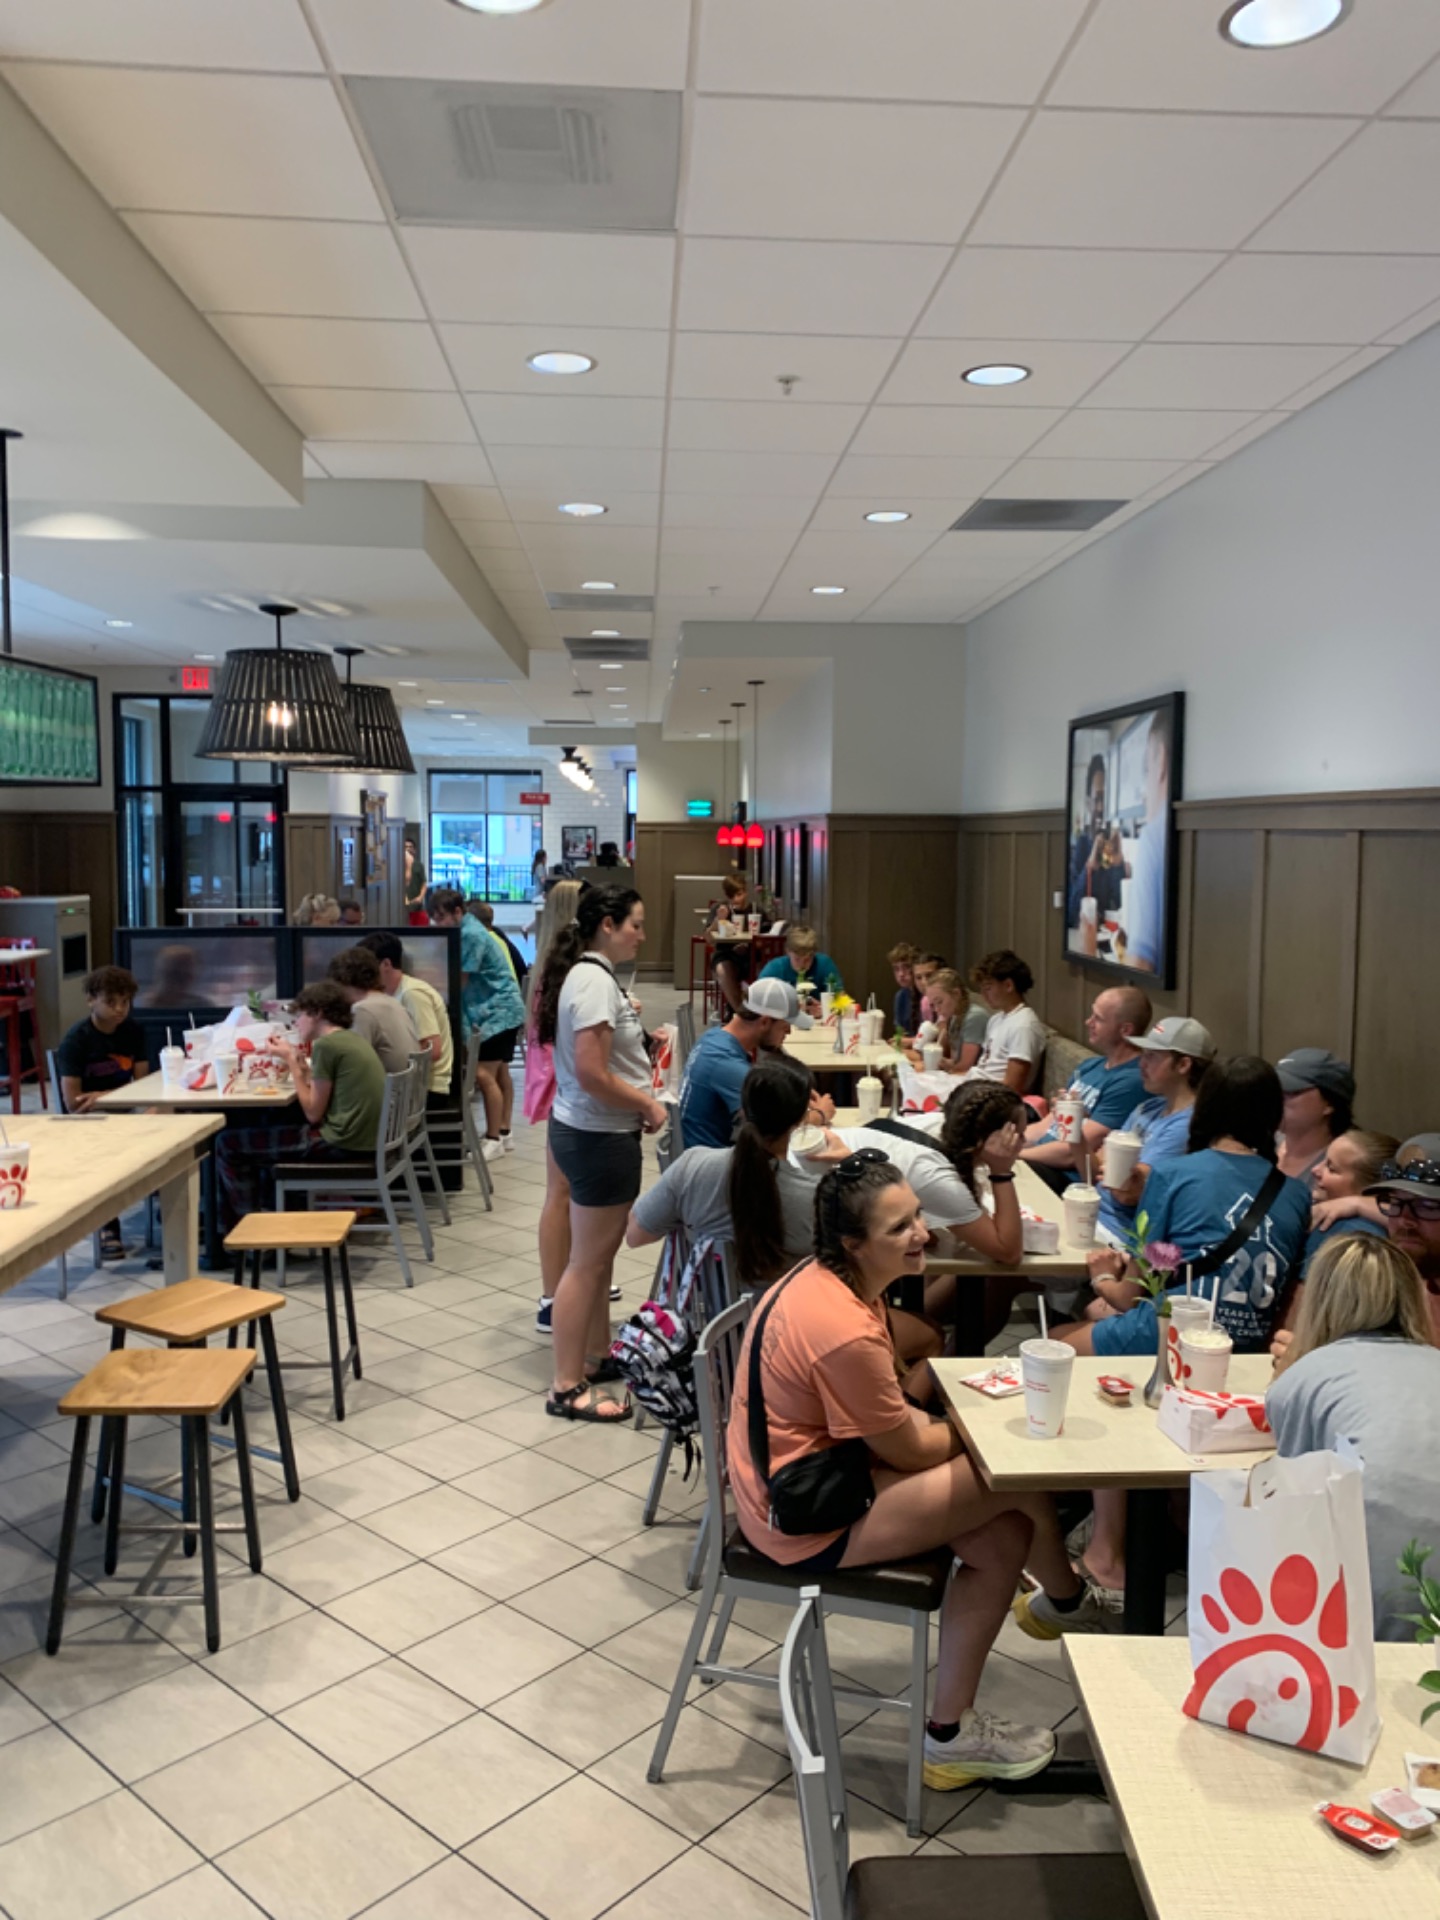 Dinner at Chick- Fil-A